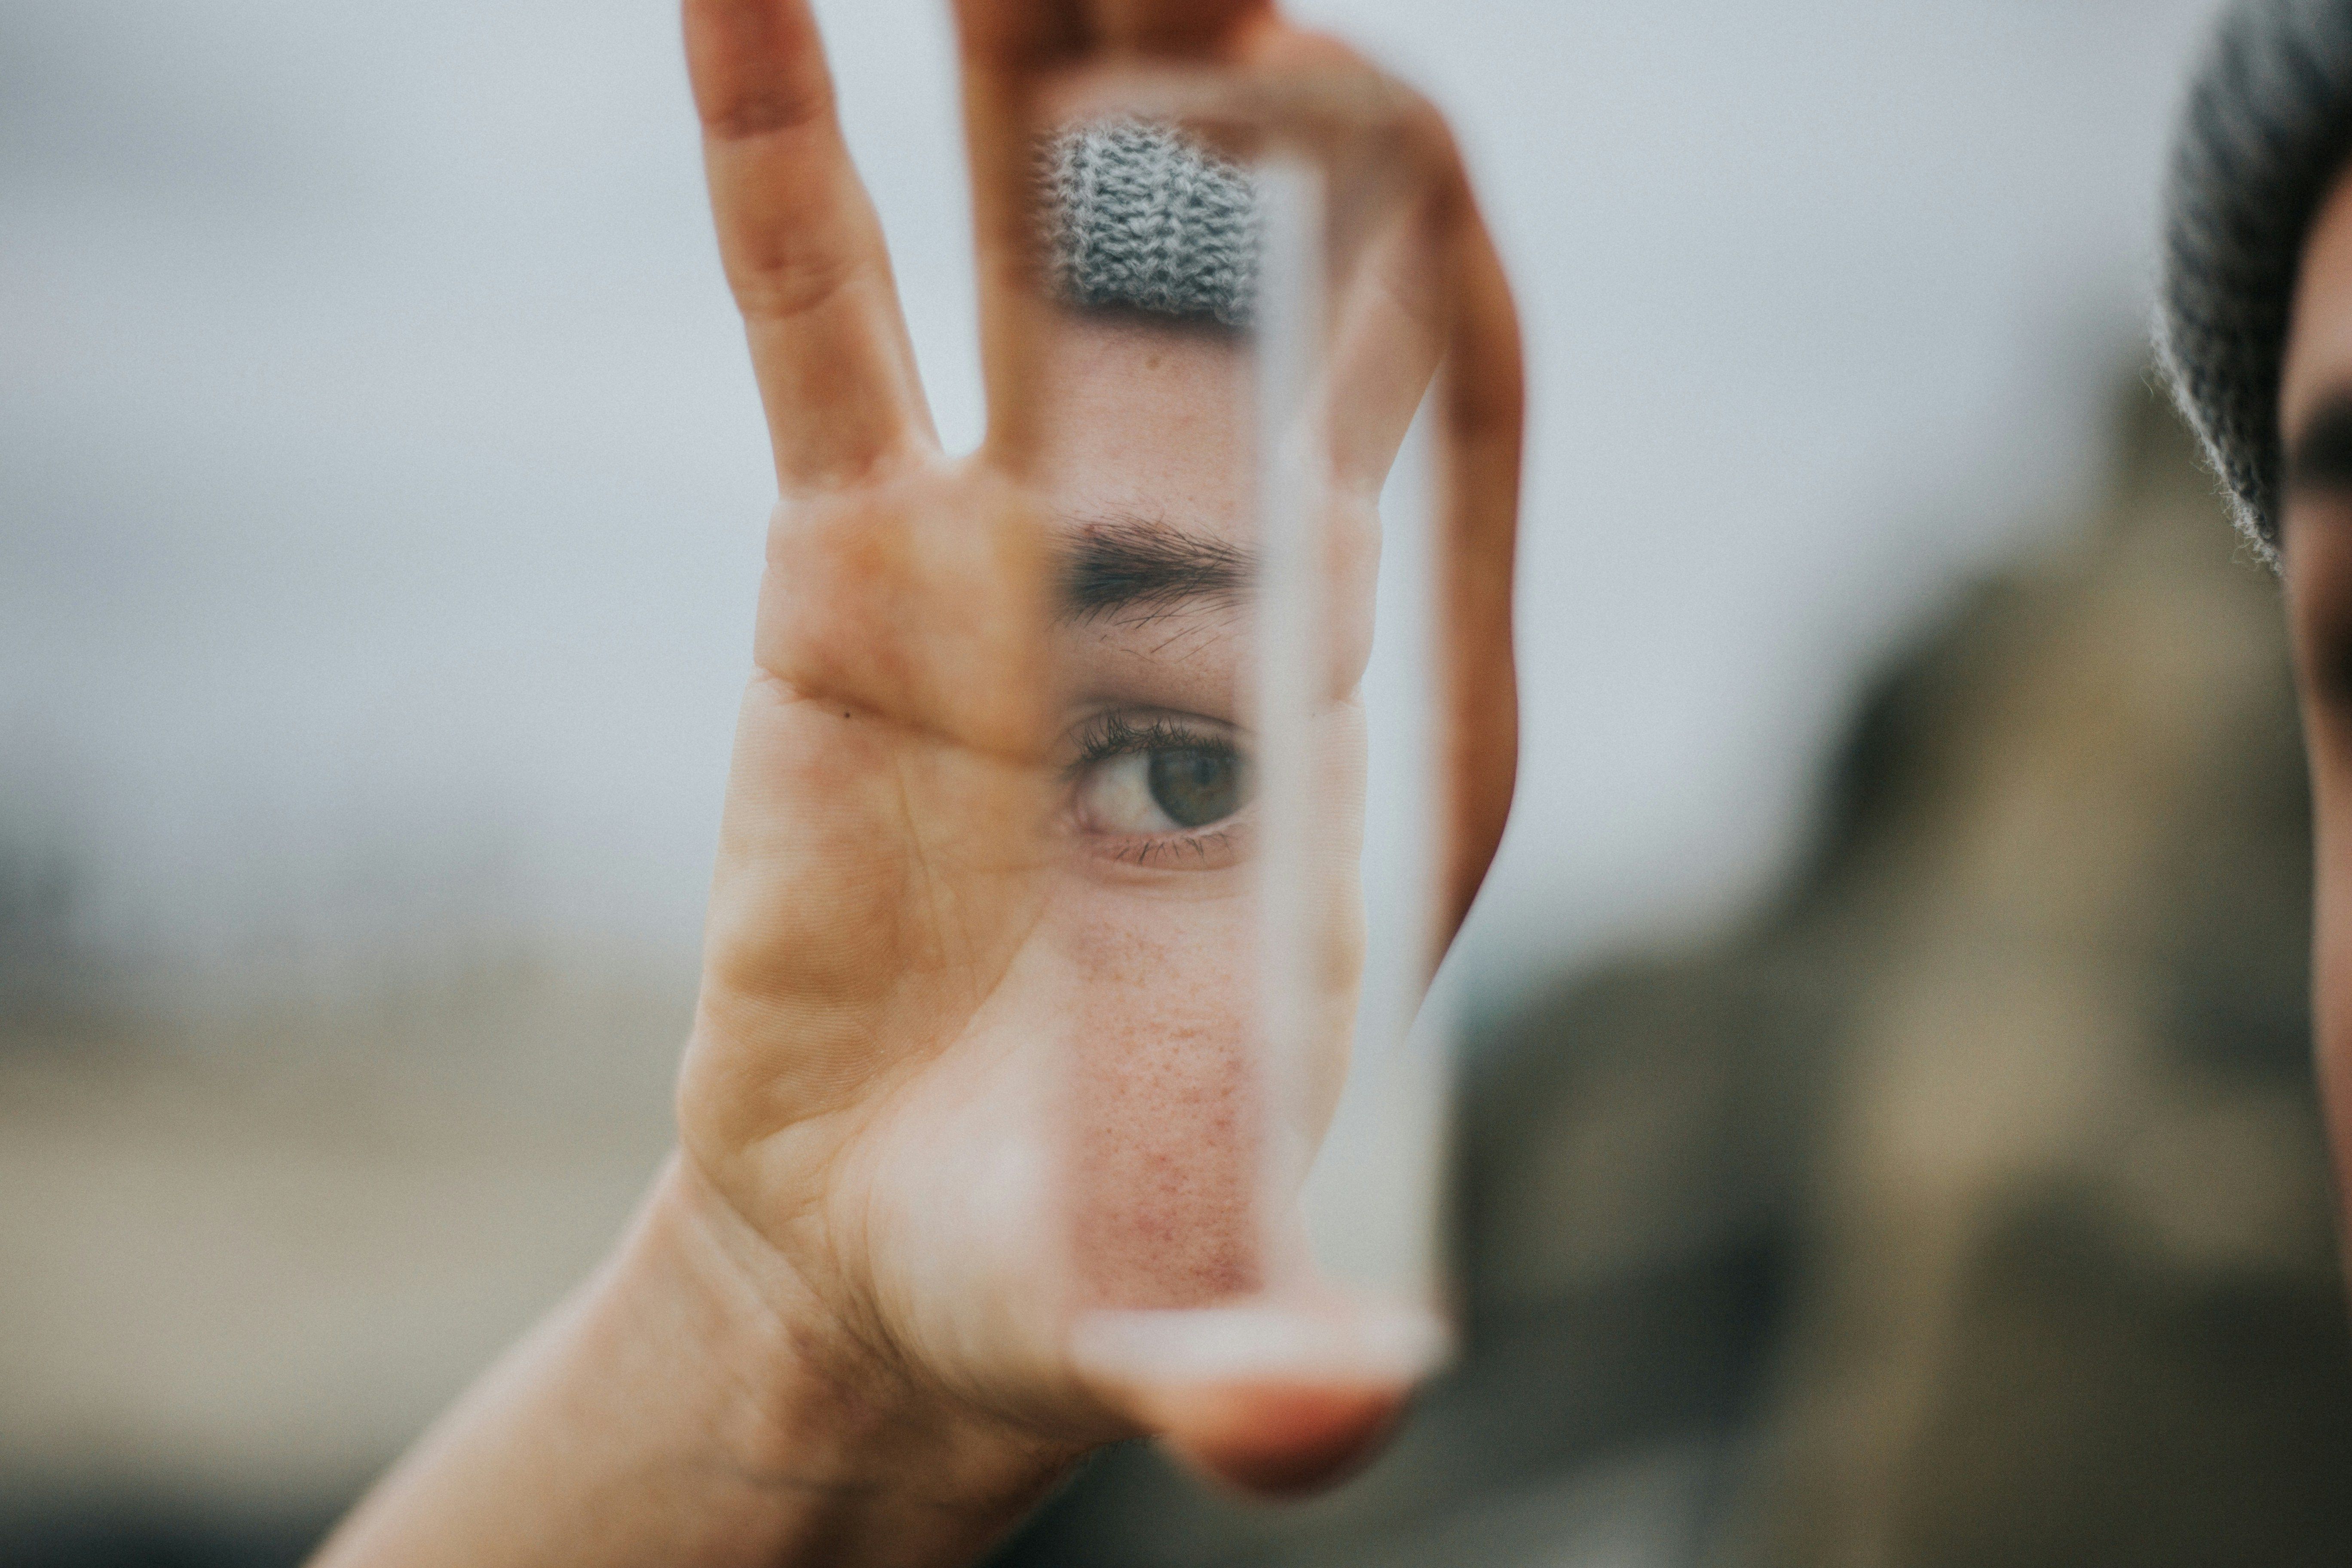 A hand holds up a reflective glass fragment, revealing a small sliver of someone's face, including a pensive eye staring back.